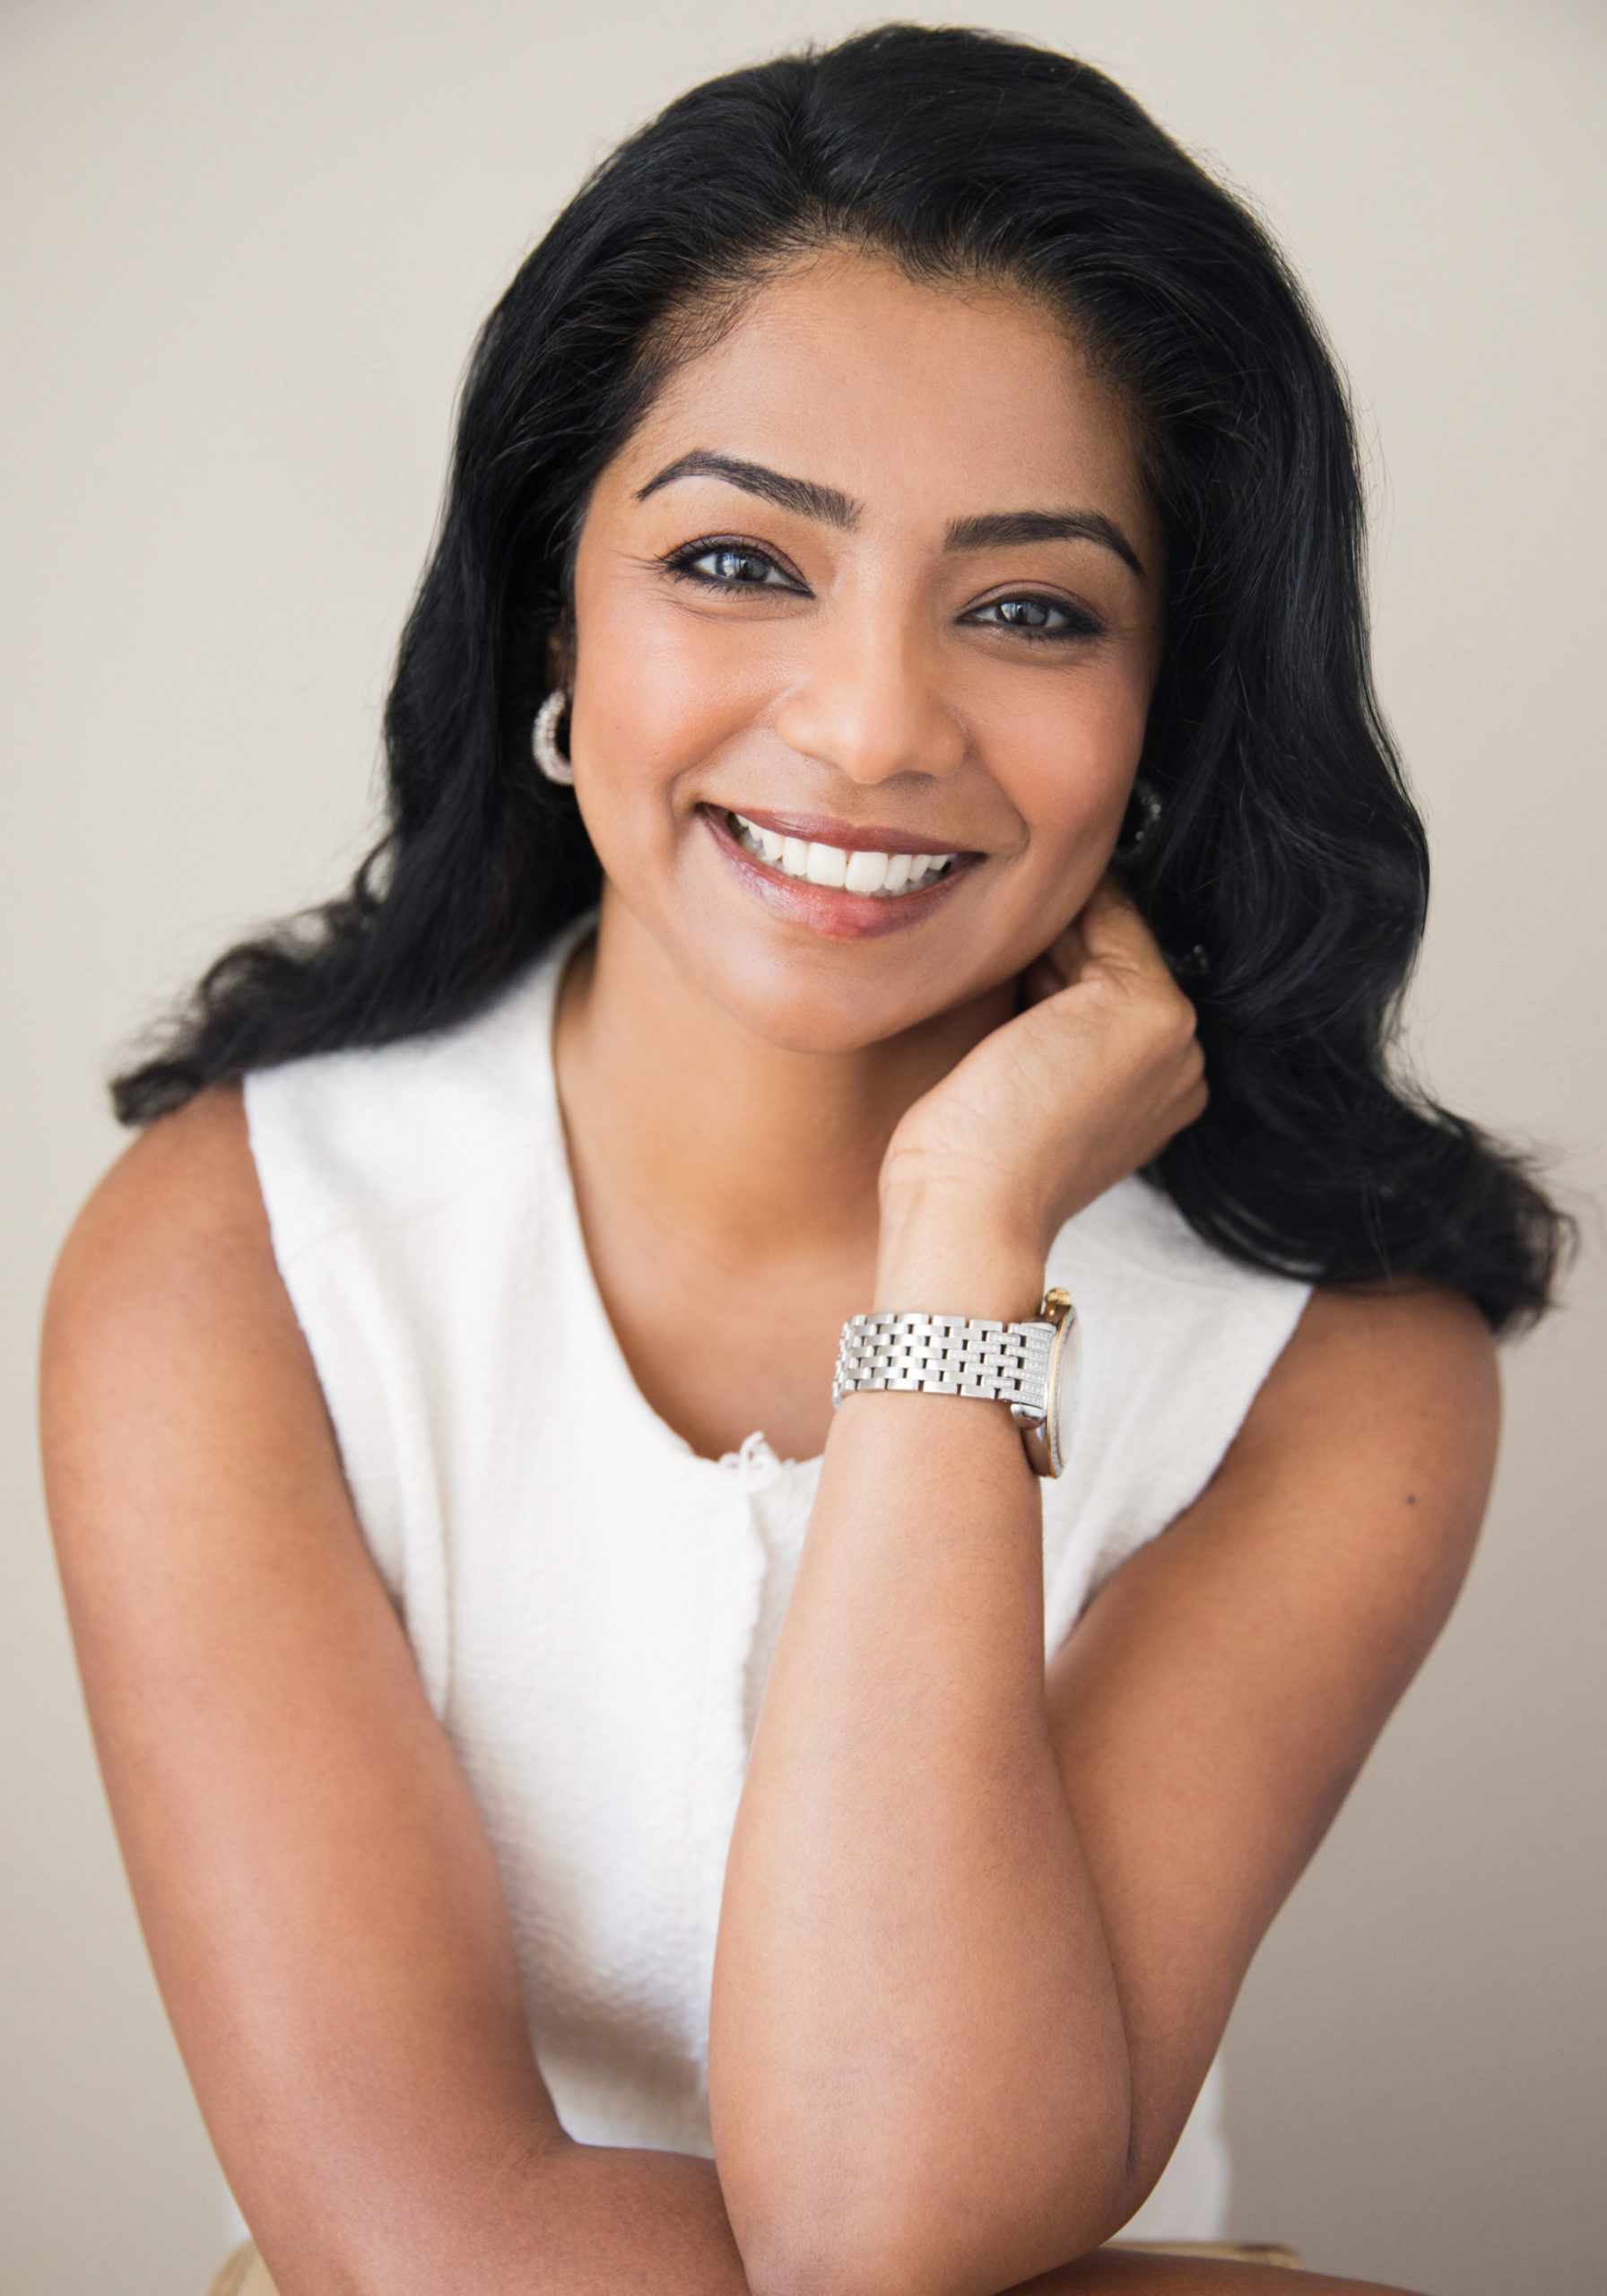 Five Simple Steps to Thrive in Your Leadership  | Sheeba Varghese